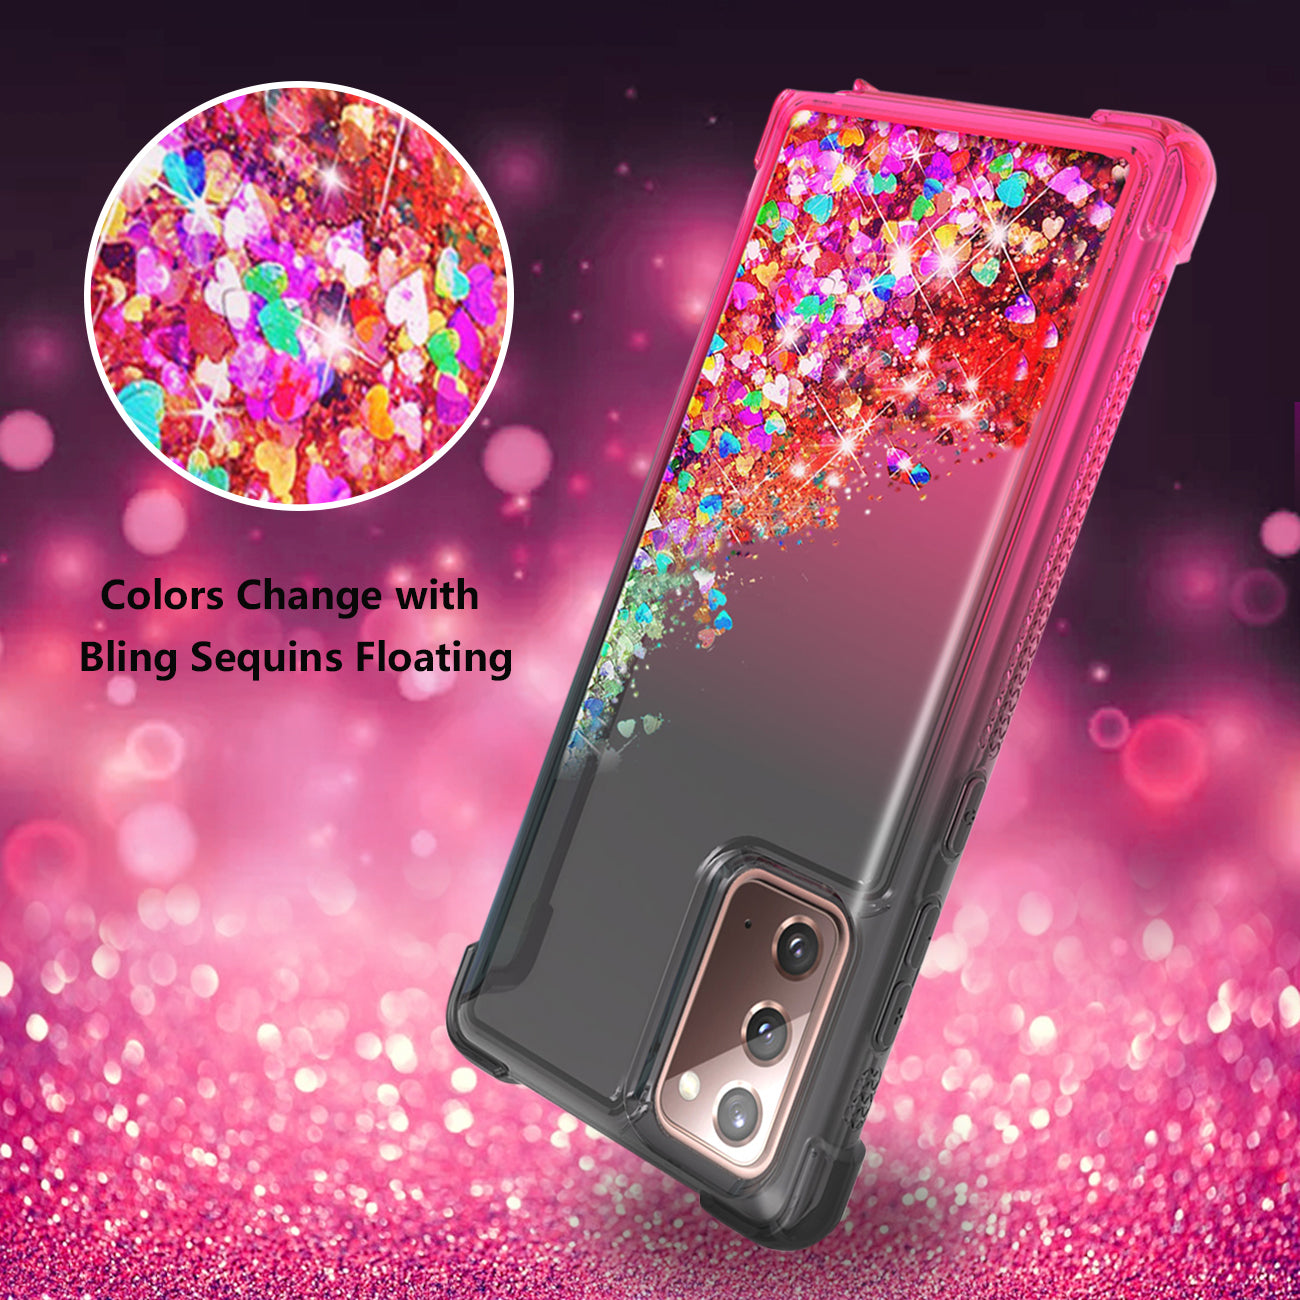 Shiny Flowing Glitter Liquid Bumper Case For SAMSUNG GALAXY NOTE 20 In RED/Black